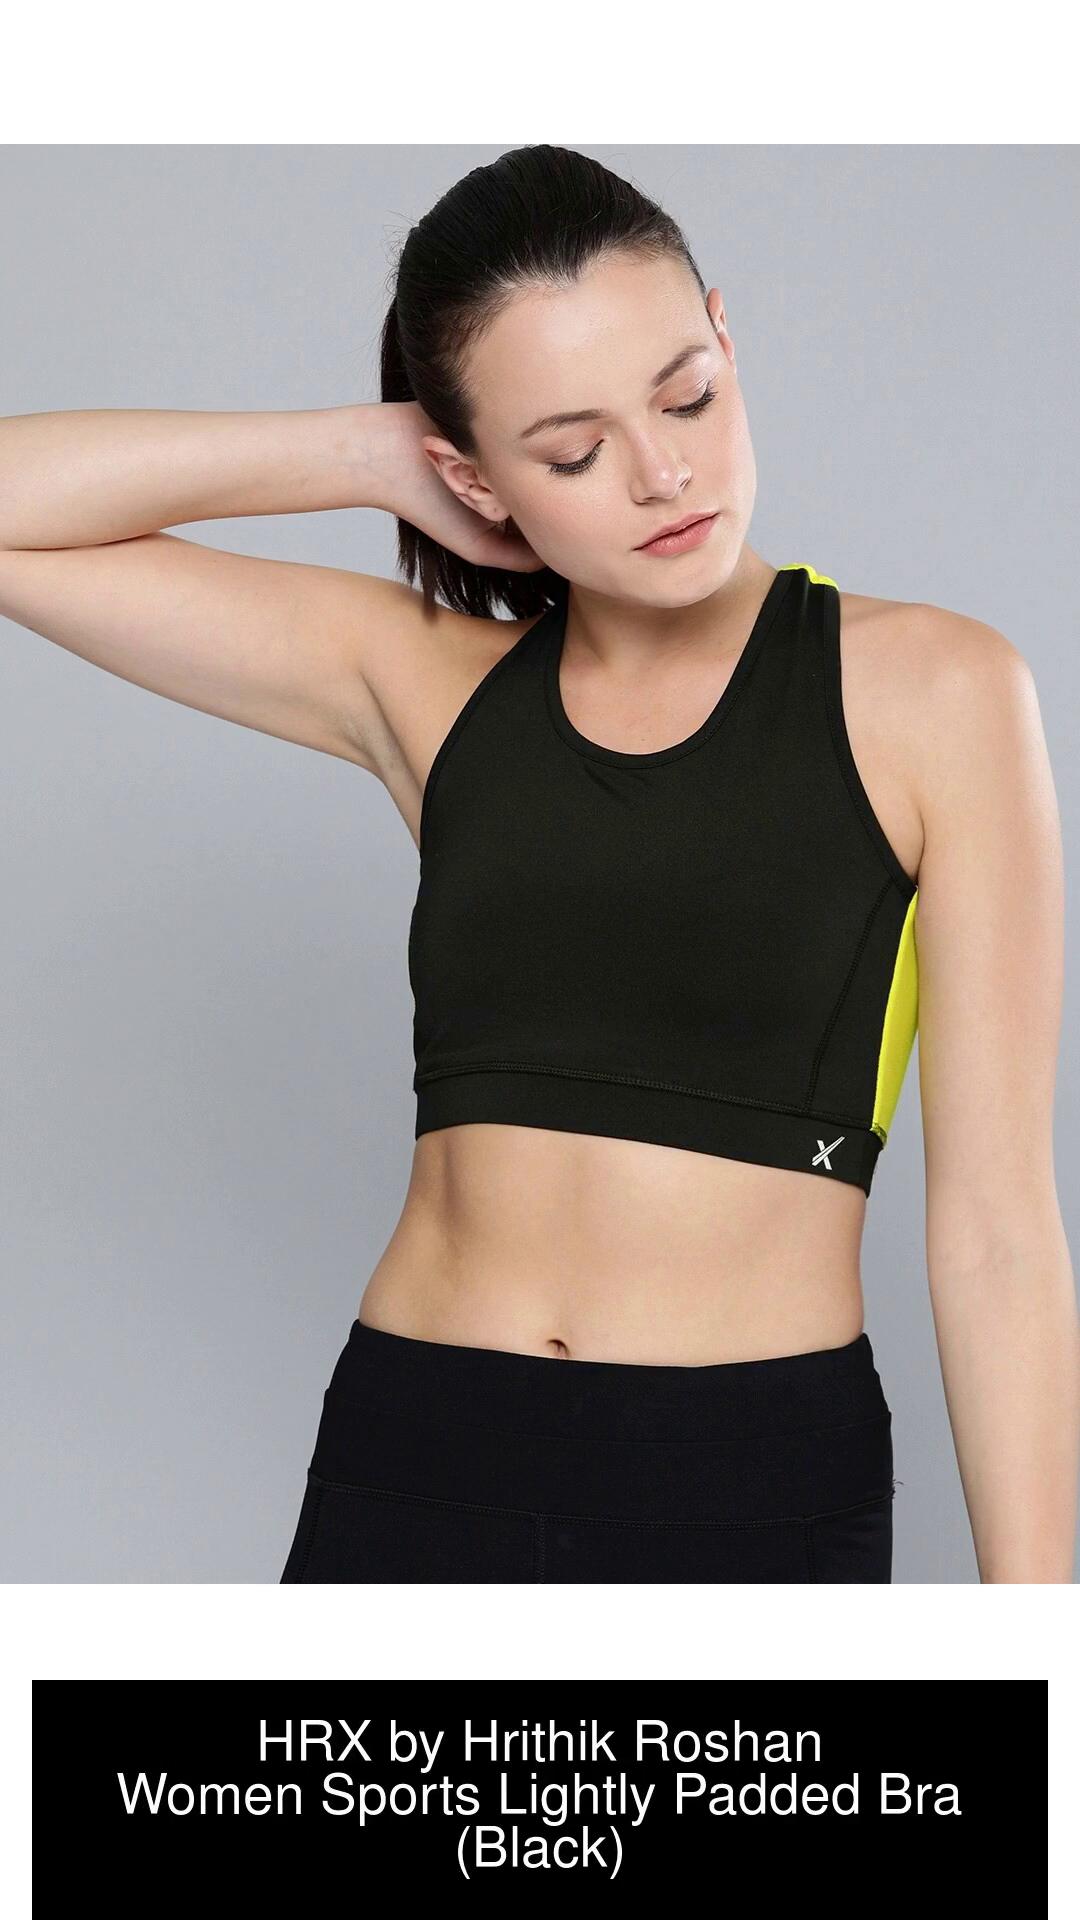 HRX by Hrithik Roshan Women Sports Heavily Padded Bra - Buy HRX by Hrithik  Roshan Women Sports Heavily Padded Bra Online at Best Prices in India